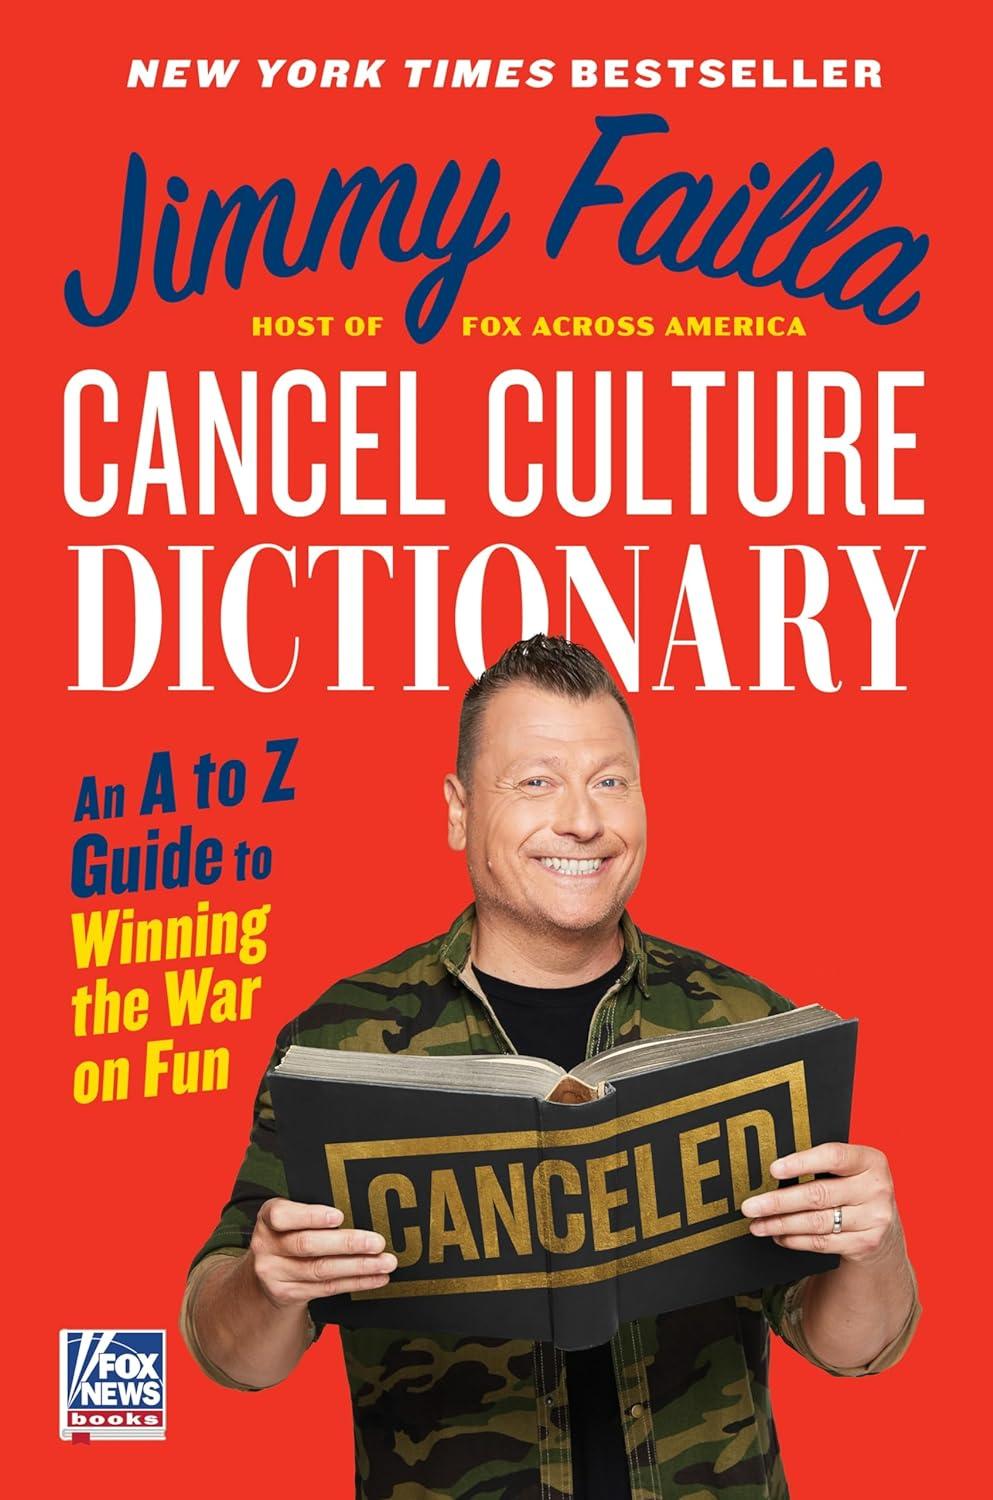 "Cancel Culture Dictionary: An A to Z Guide to Wining the War on Fun," by Jimmy Failla.